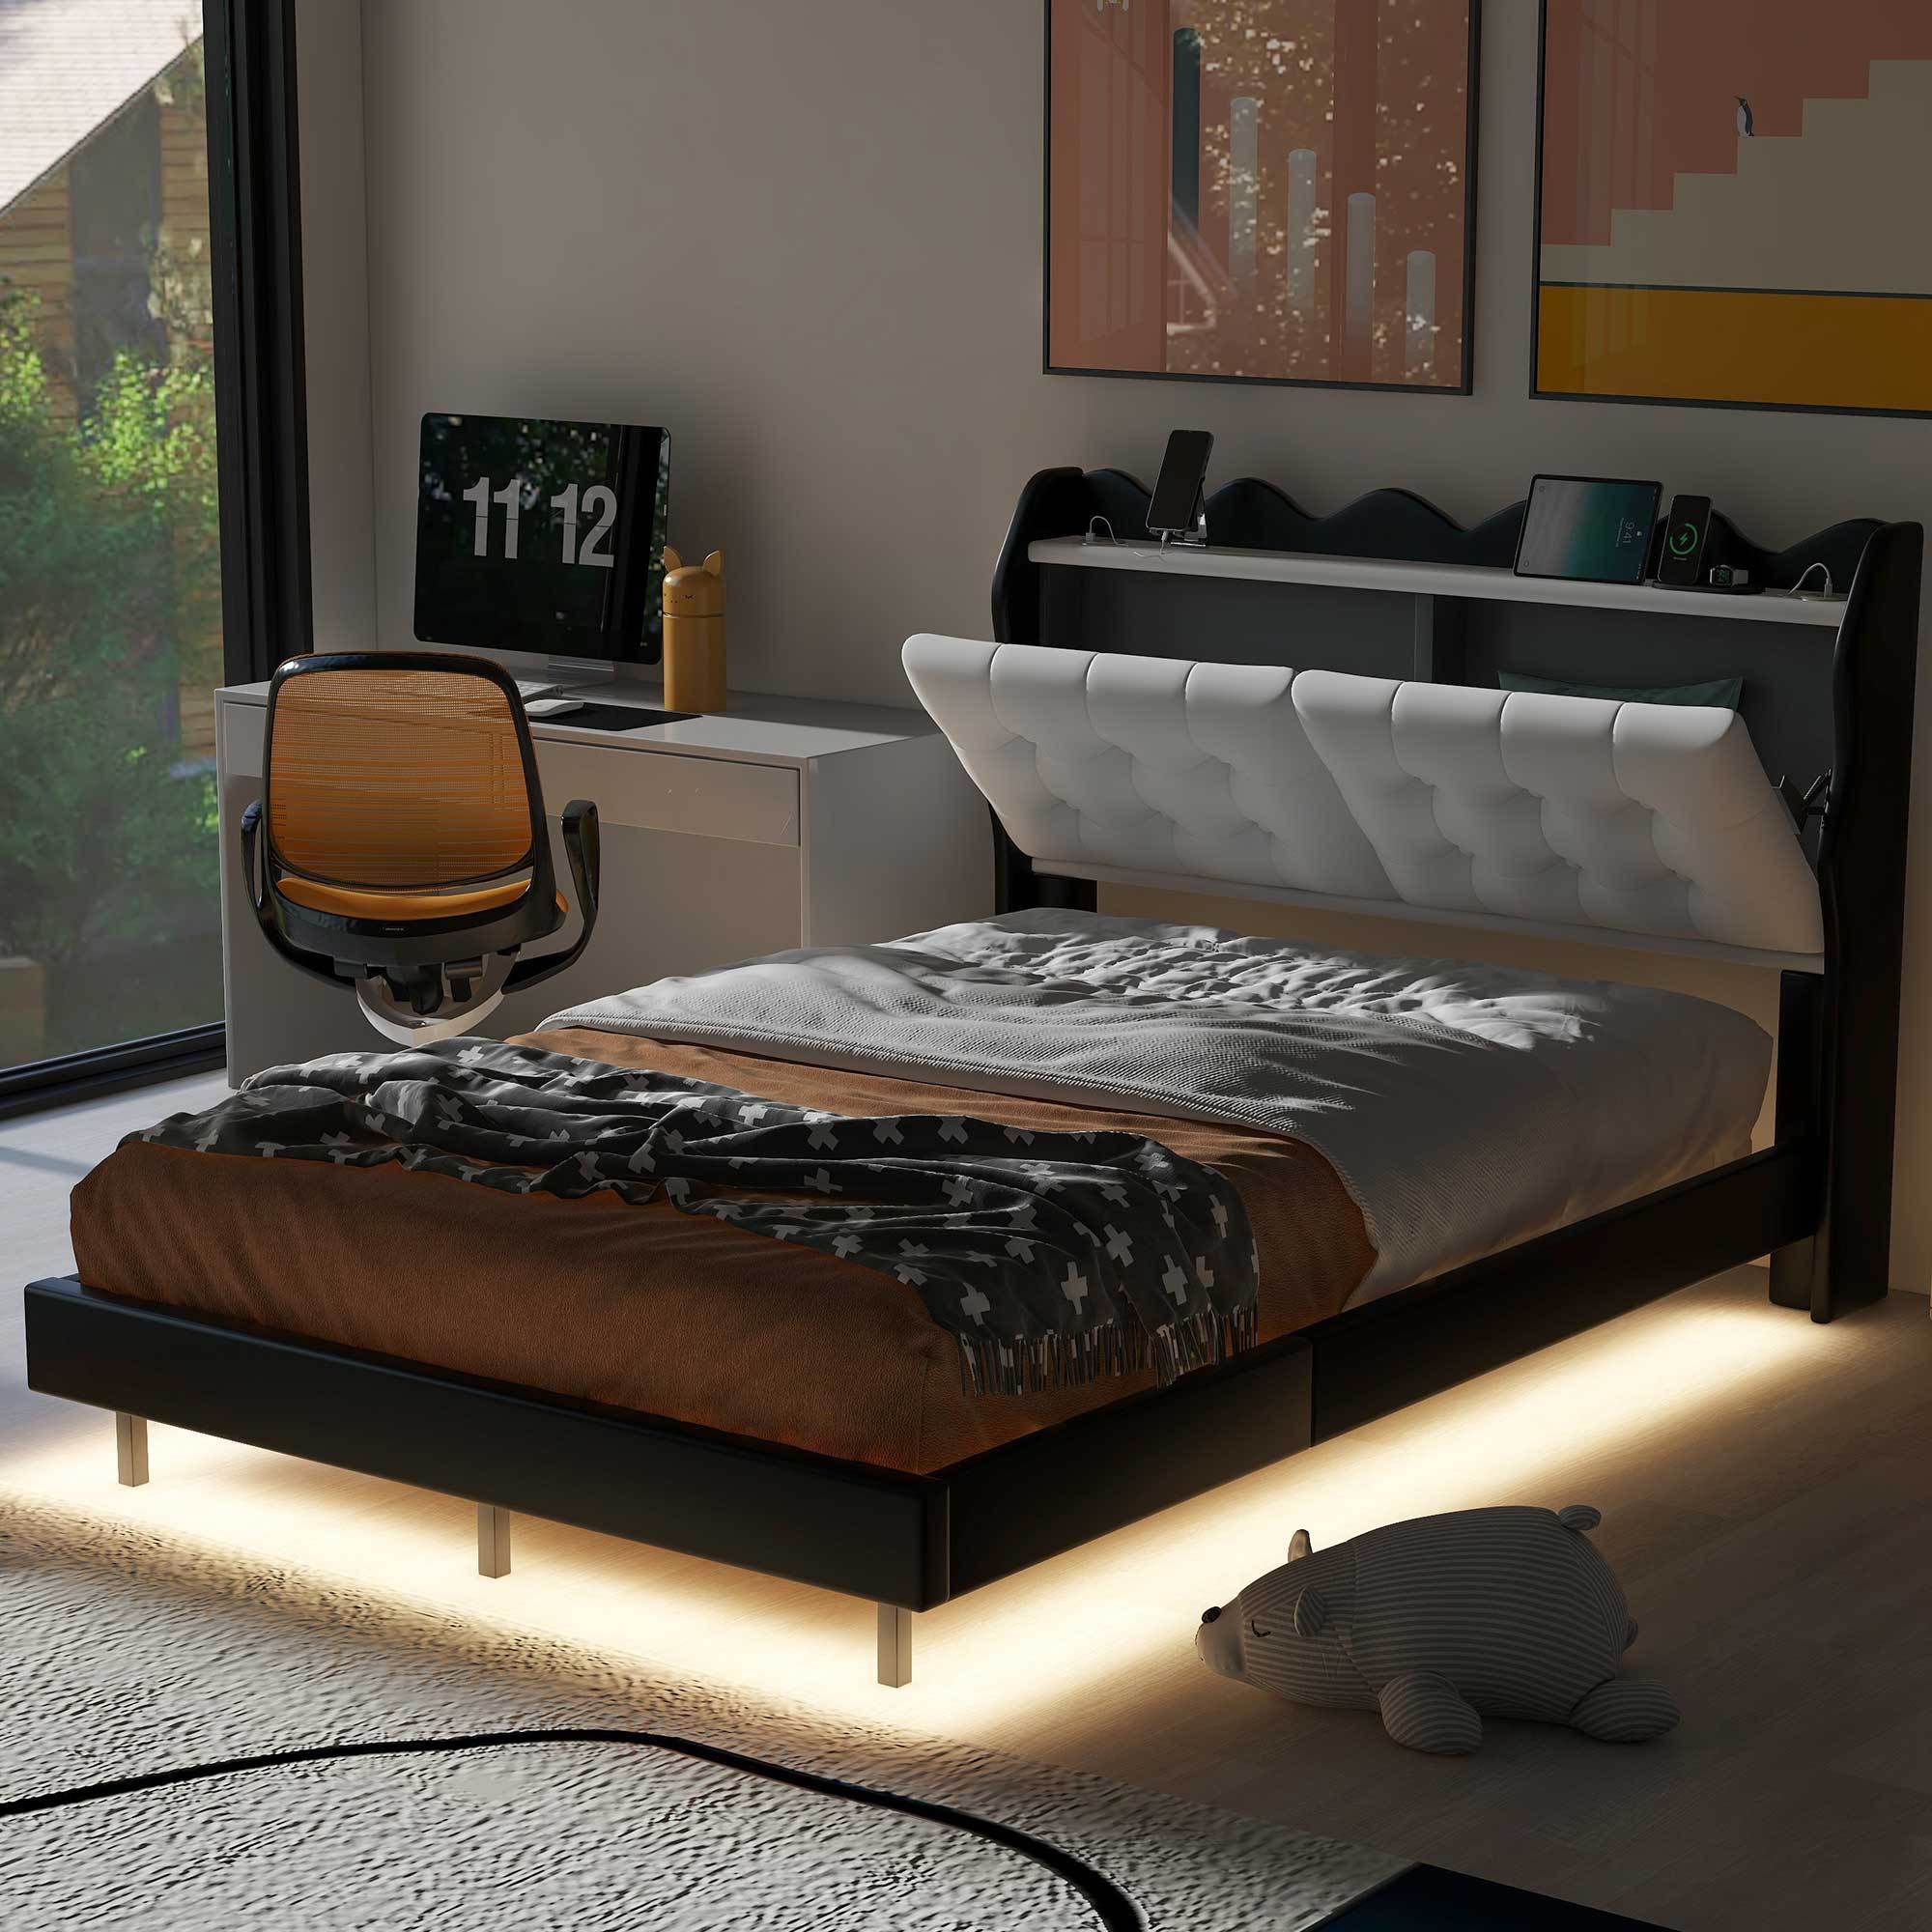 🆓🚛 Full Size Upholstery Platform Bed Frame With Led Light Strips and Built-In Storage Space, Black